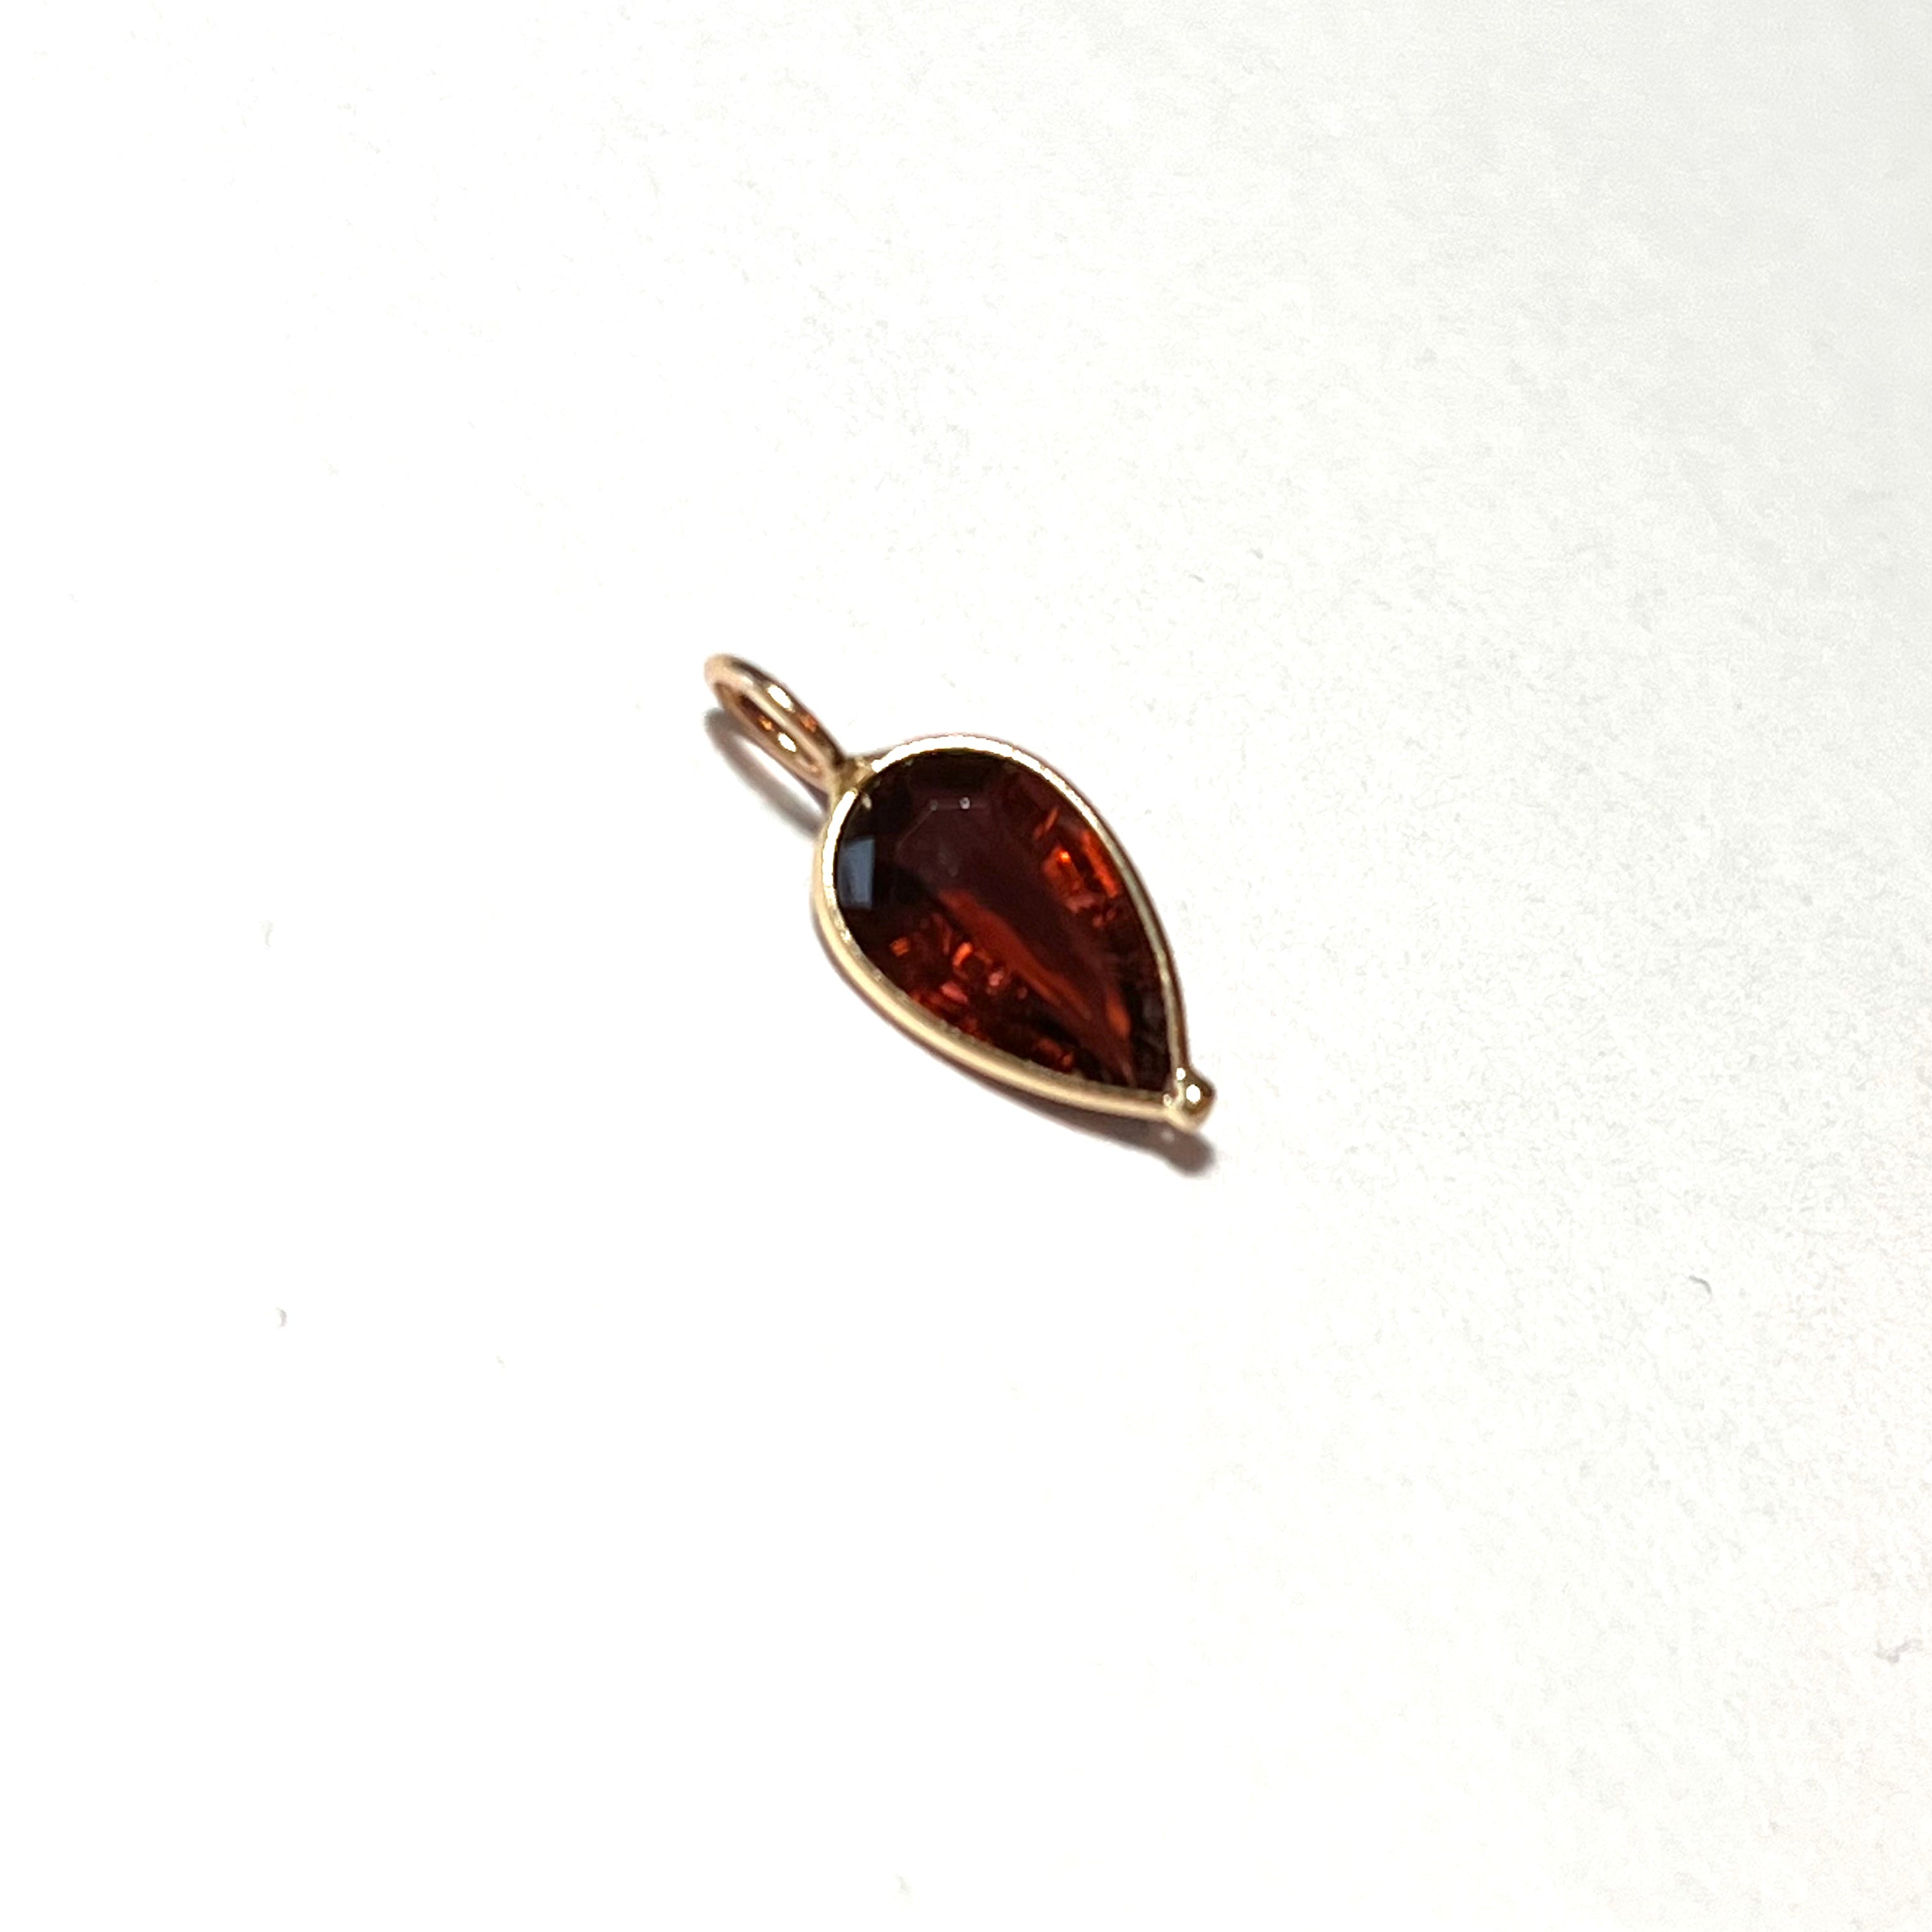 1.24ct Pear Shaped Red Garnet Solid 14K Yellow Gold Charm Pendant 16x6mm